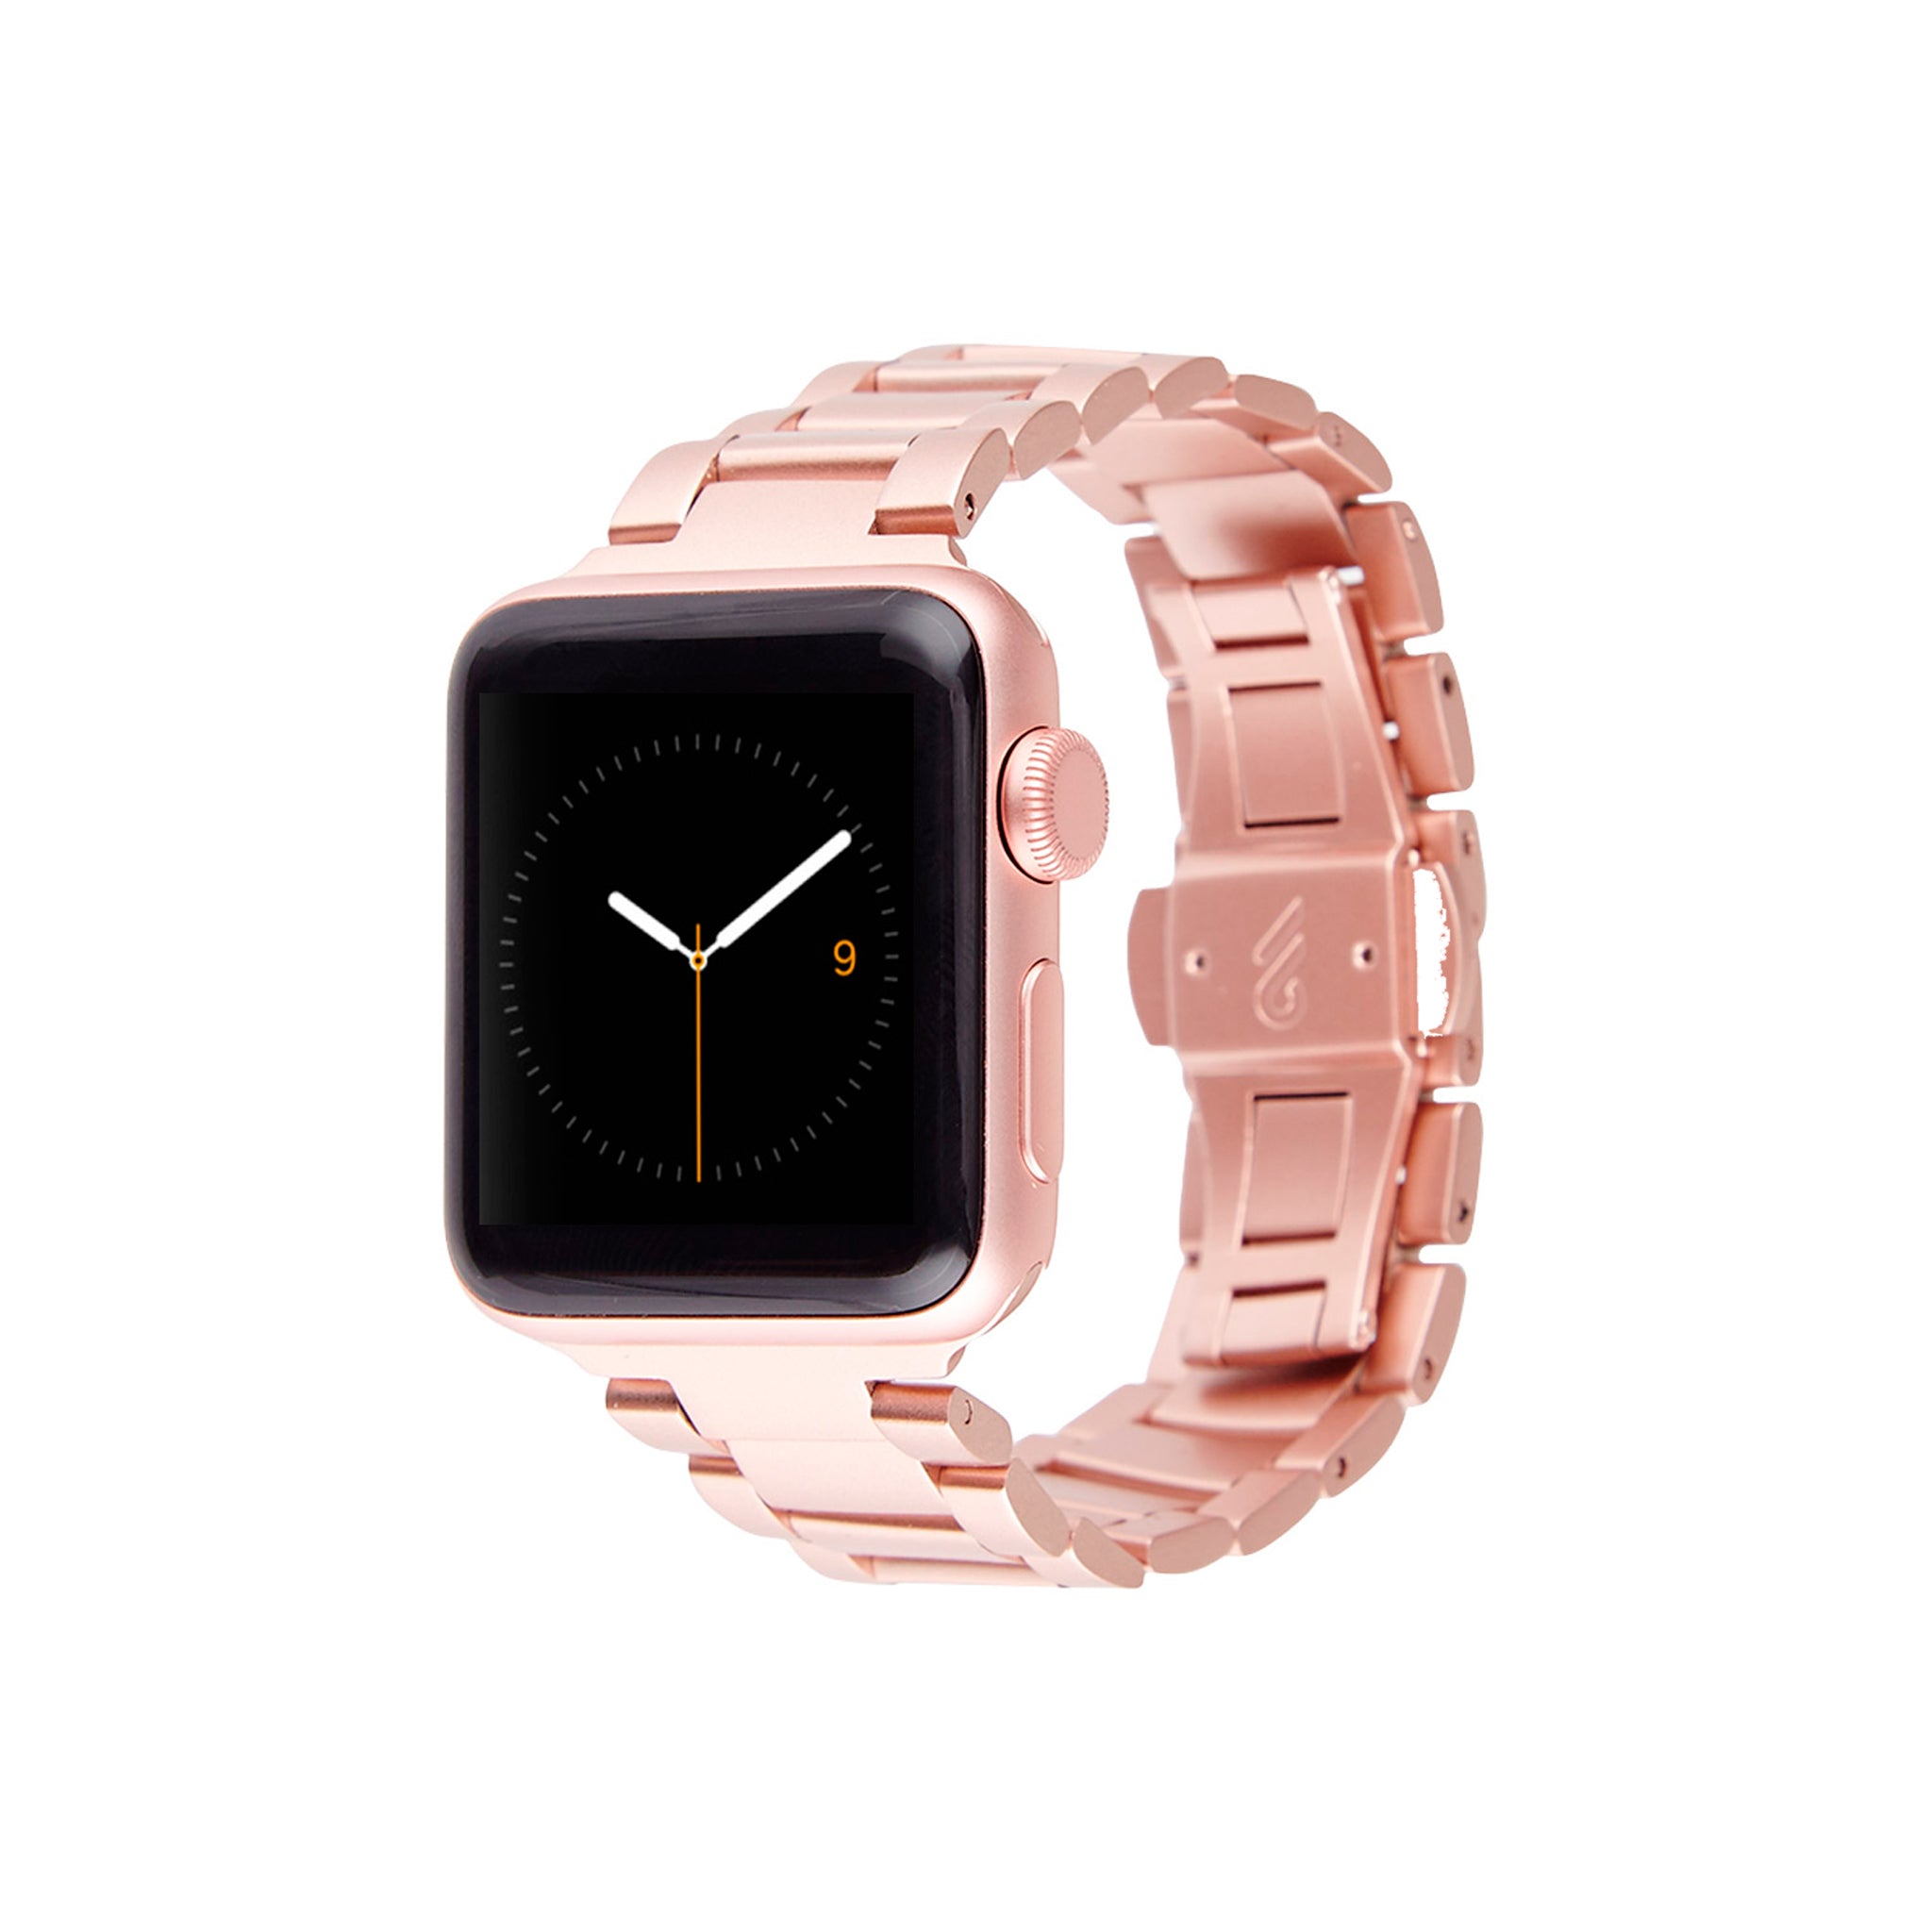 Case-mate - Linked Watchband For Apple Watch 38mm / 40mm - Rose Gold